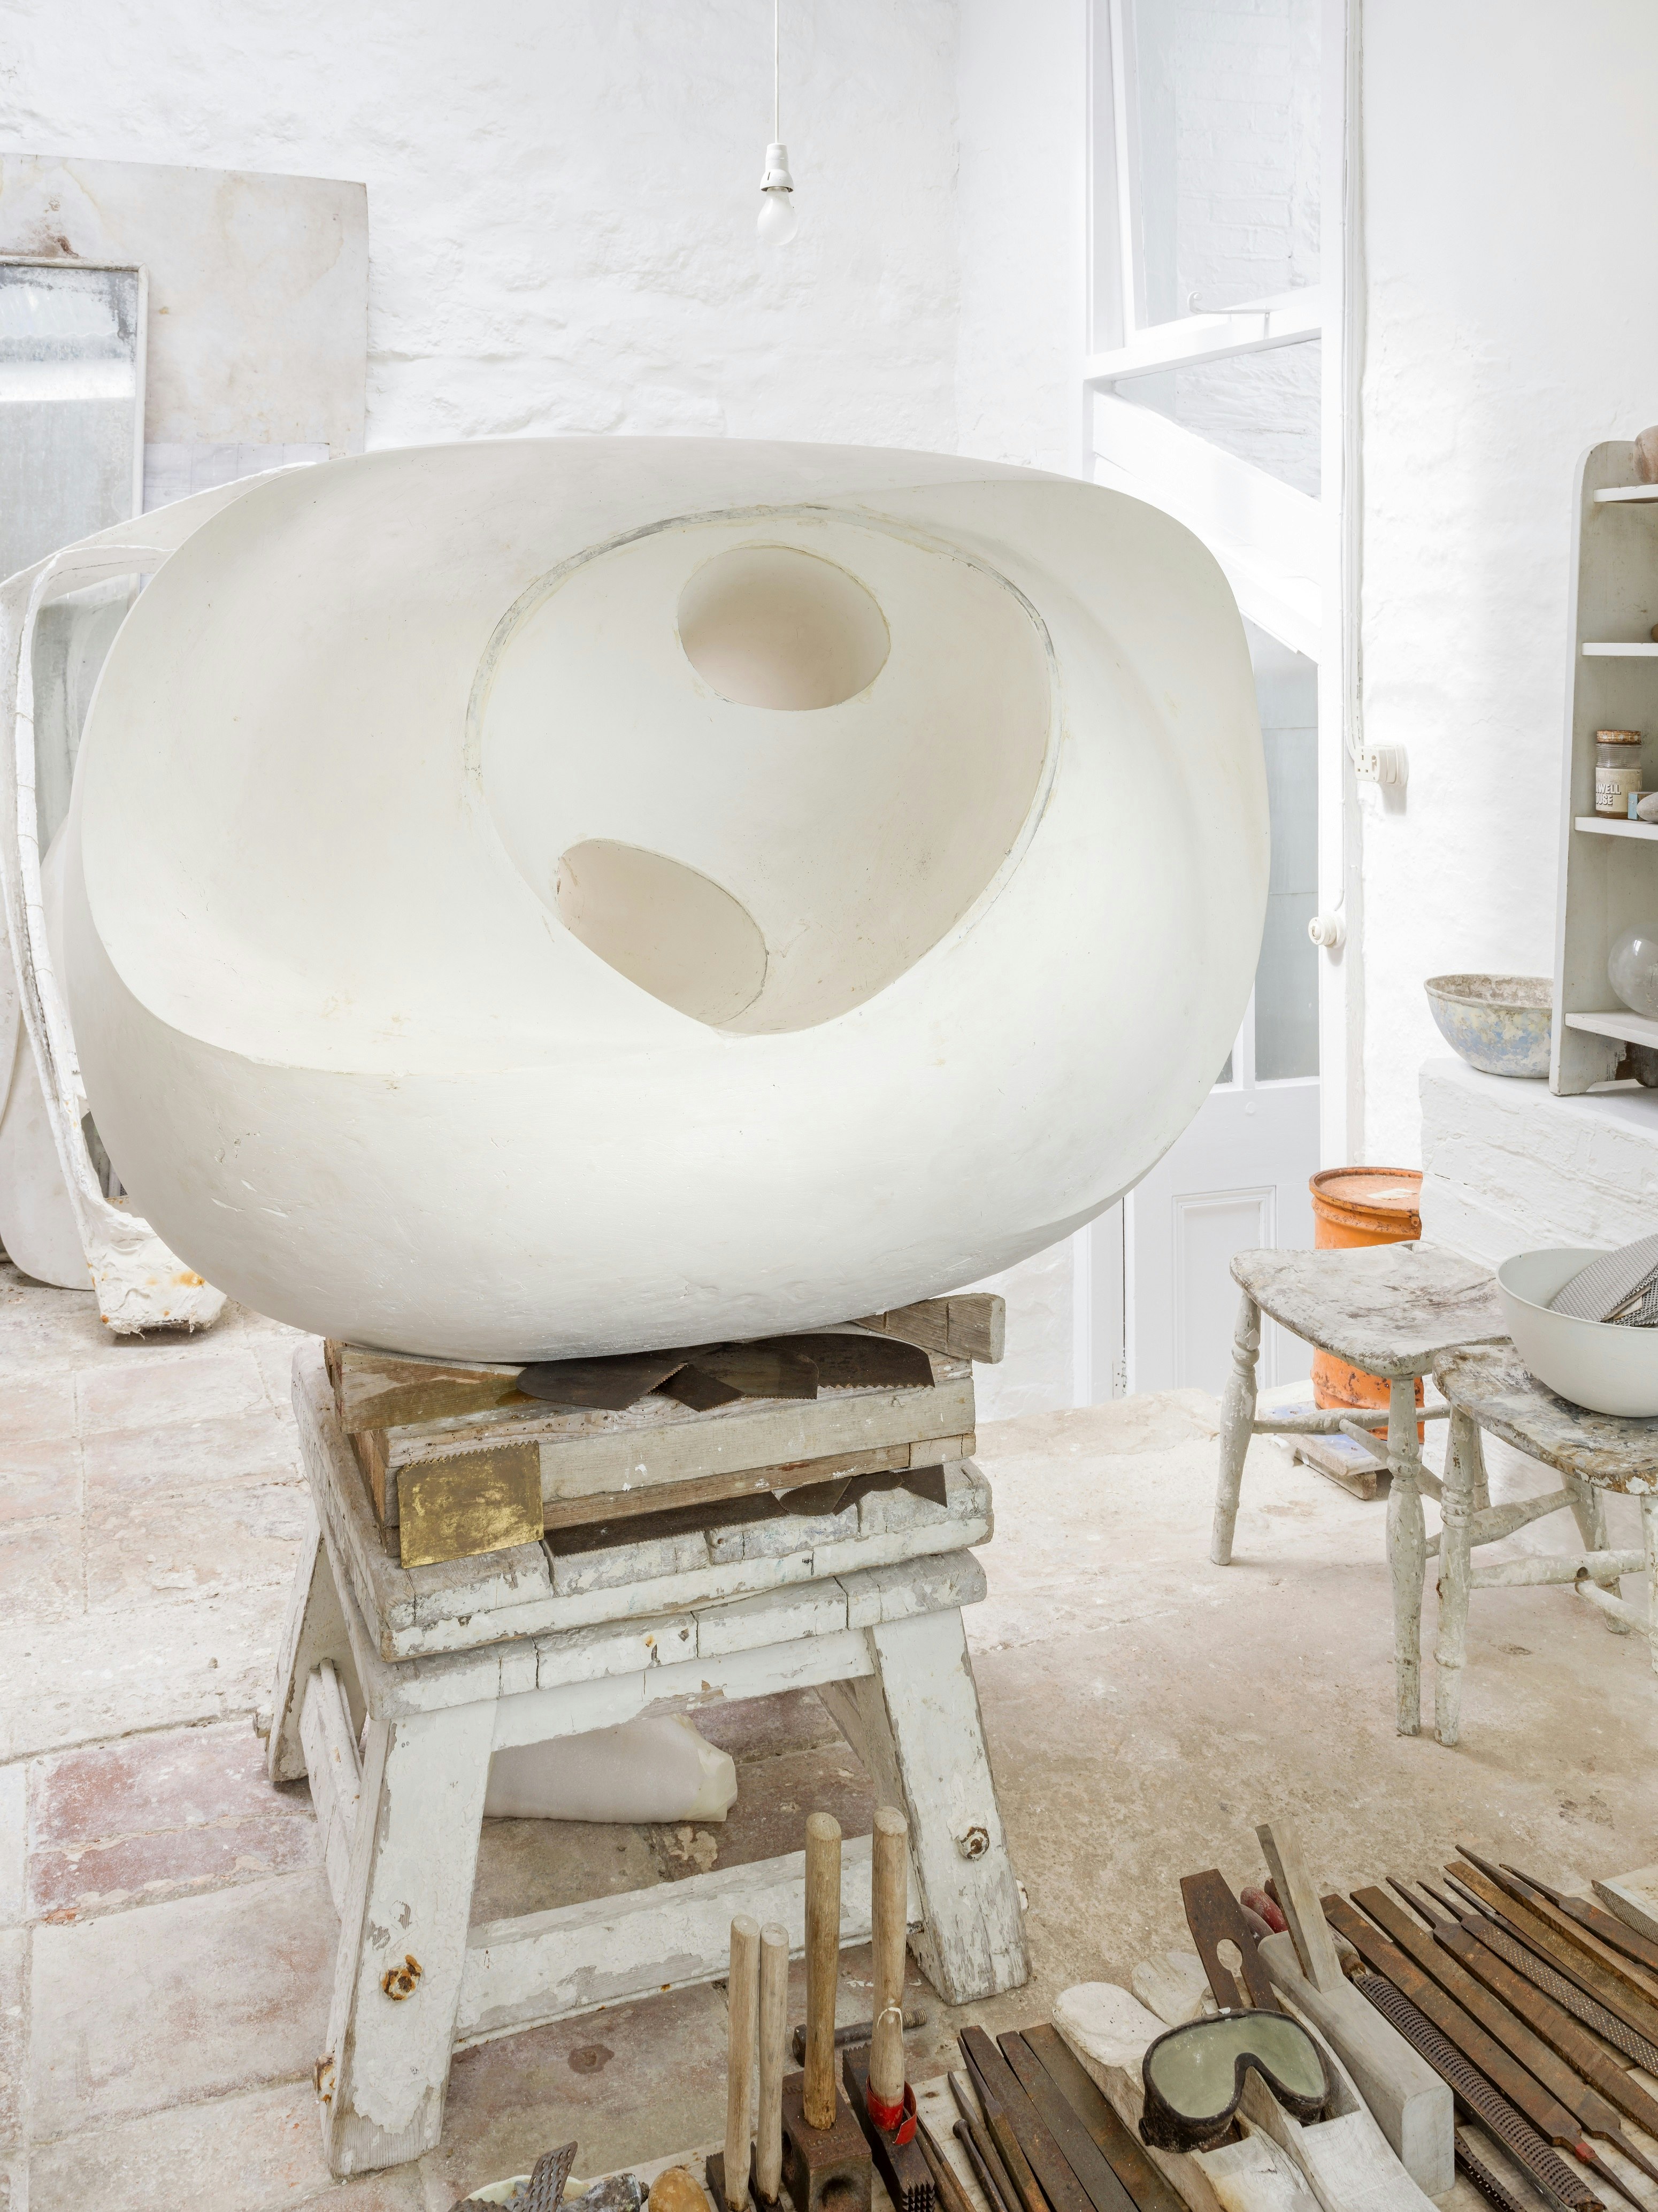 The interior of a gleaming white studio at Barbara Hepworth Museum; there is a large, white, bulbous sculpture sitting on a wooden stool.